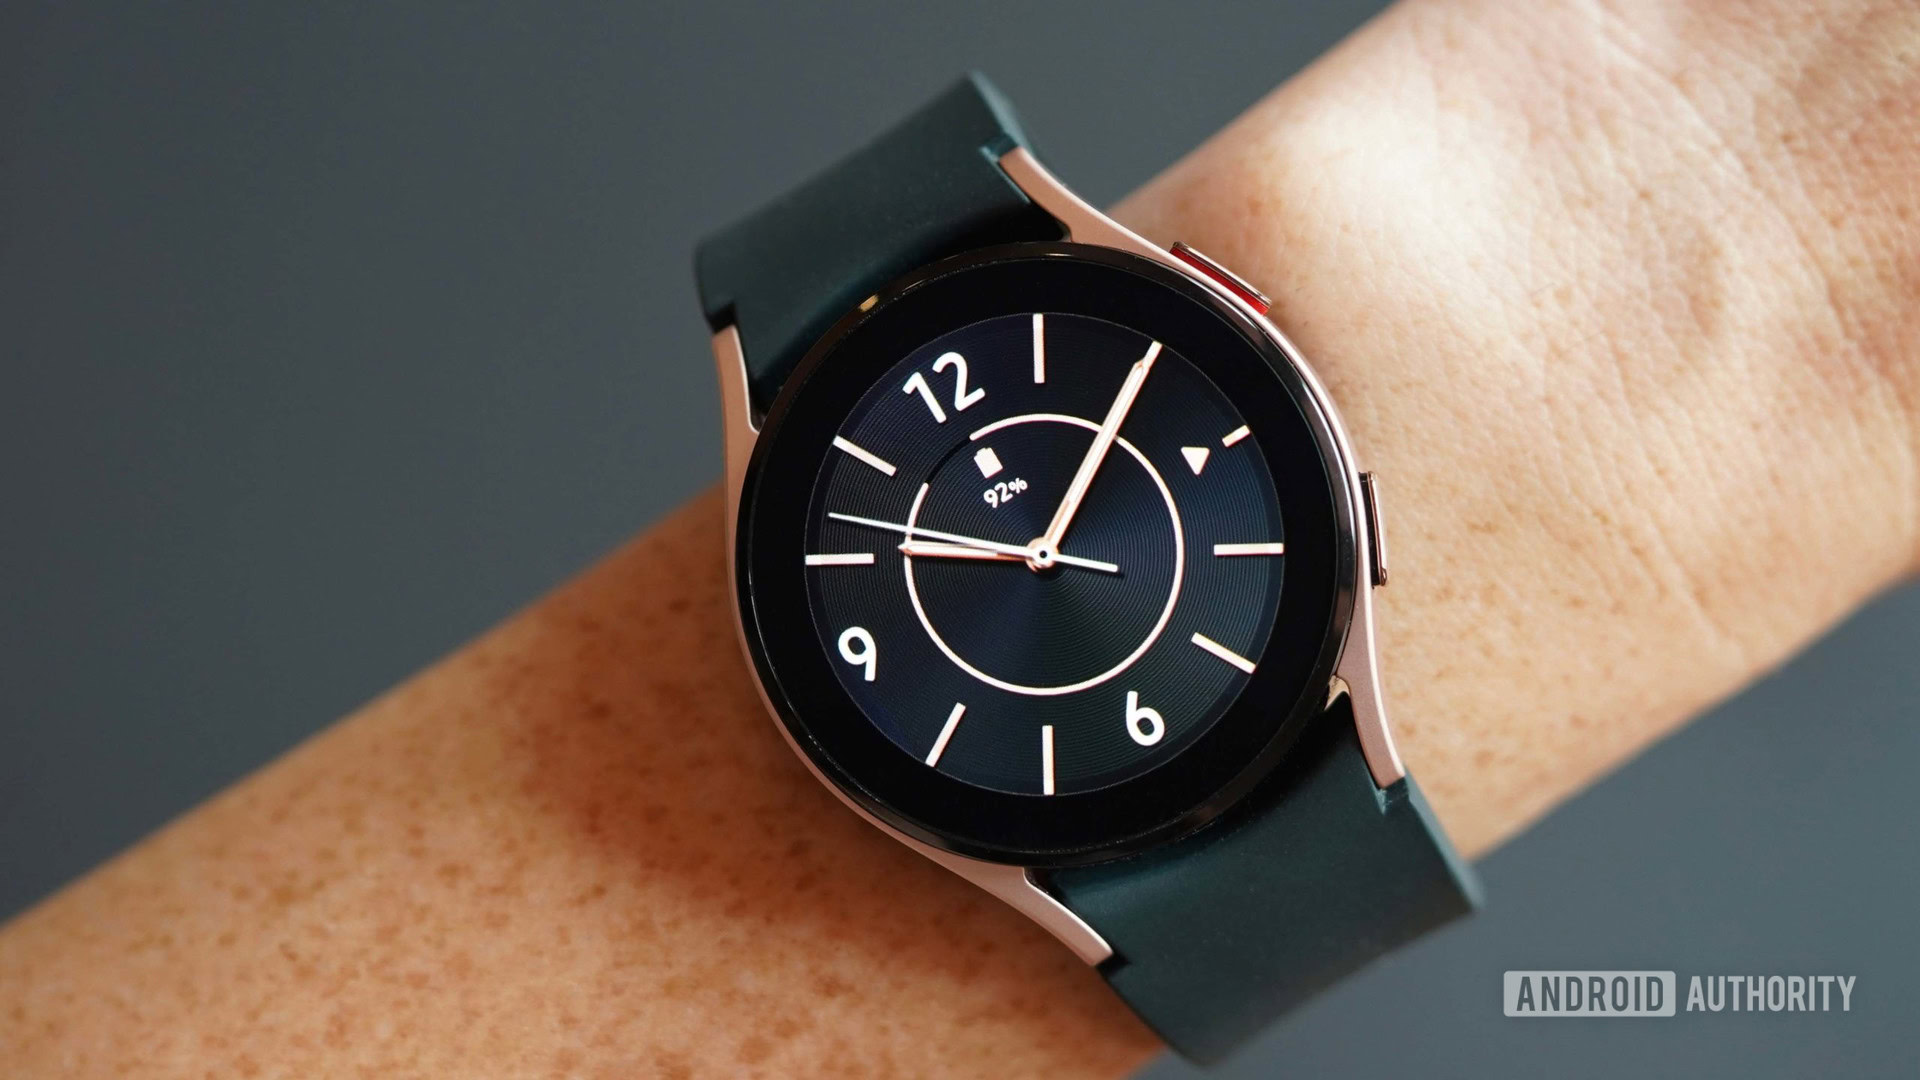 A Galaxy Watch 4 on a female's wrists displays a black and rose gold analog watch face.